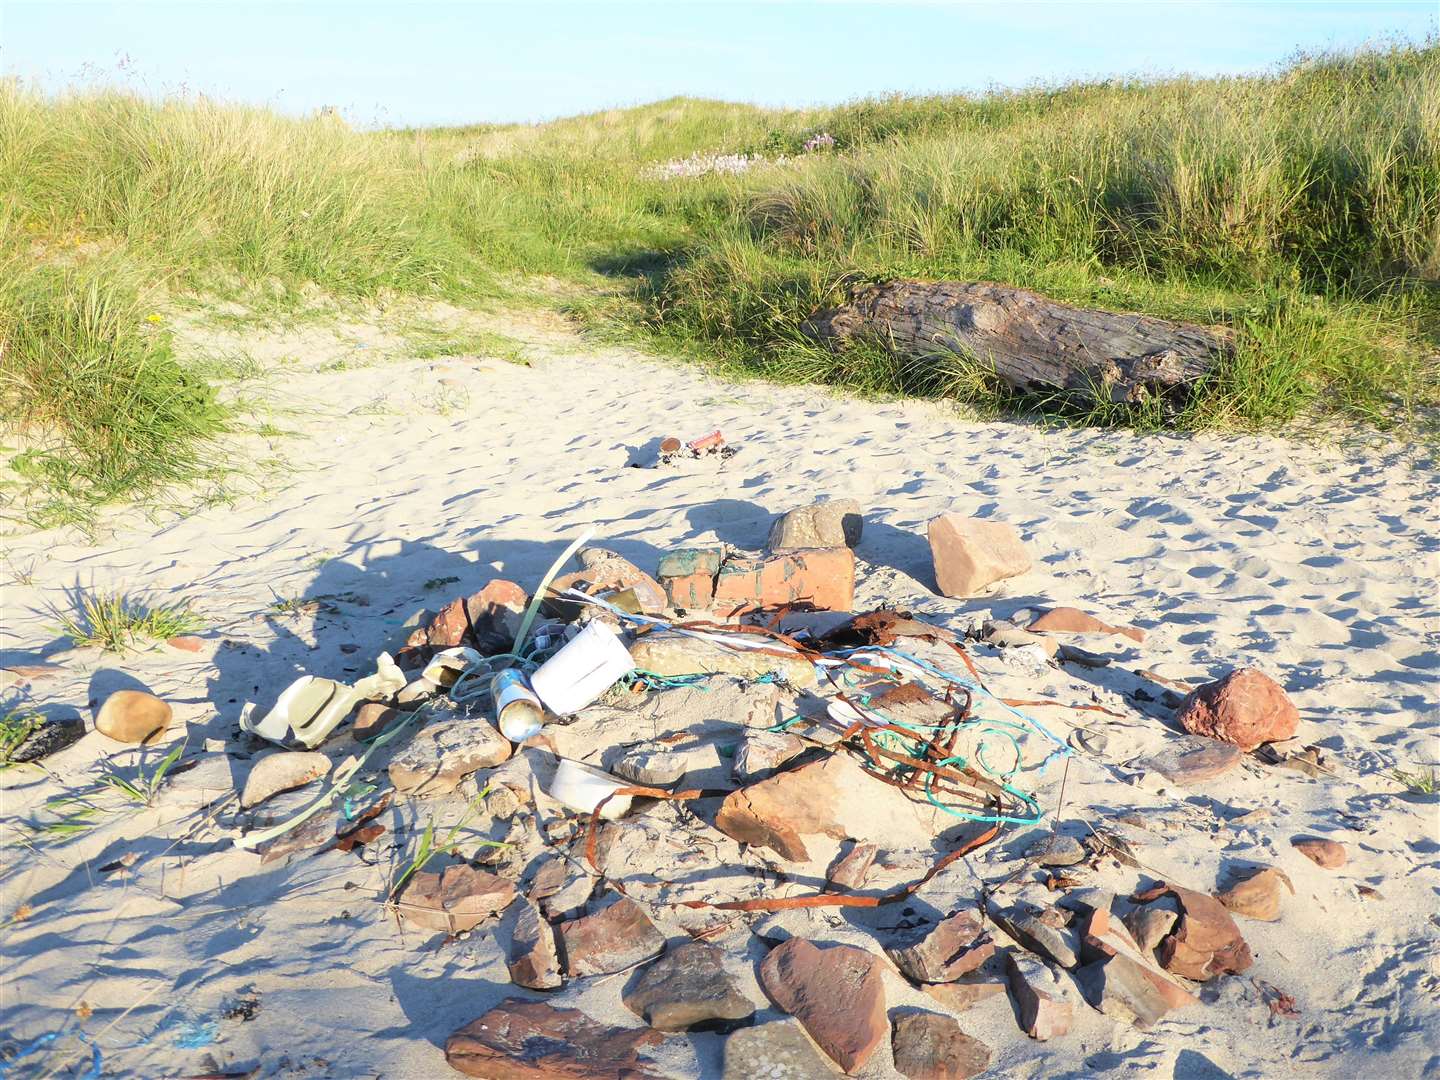 Rubbish left at Reiss beach - behaviour that the newly formed trust strongly discourages. Picture: DGS